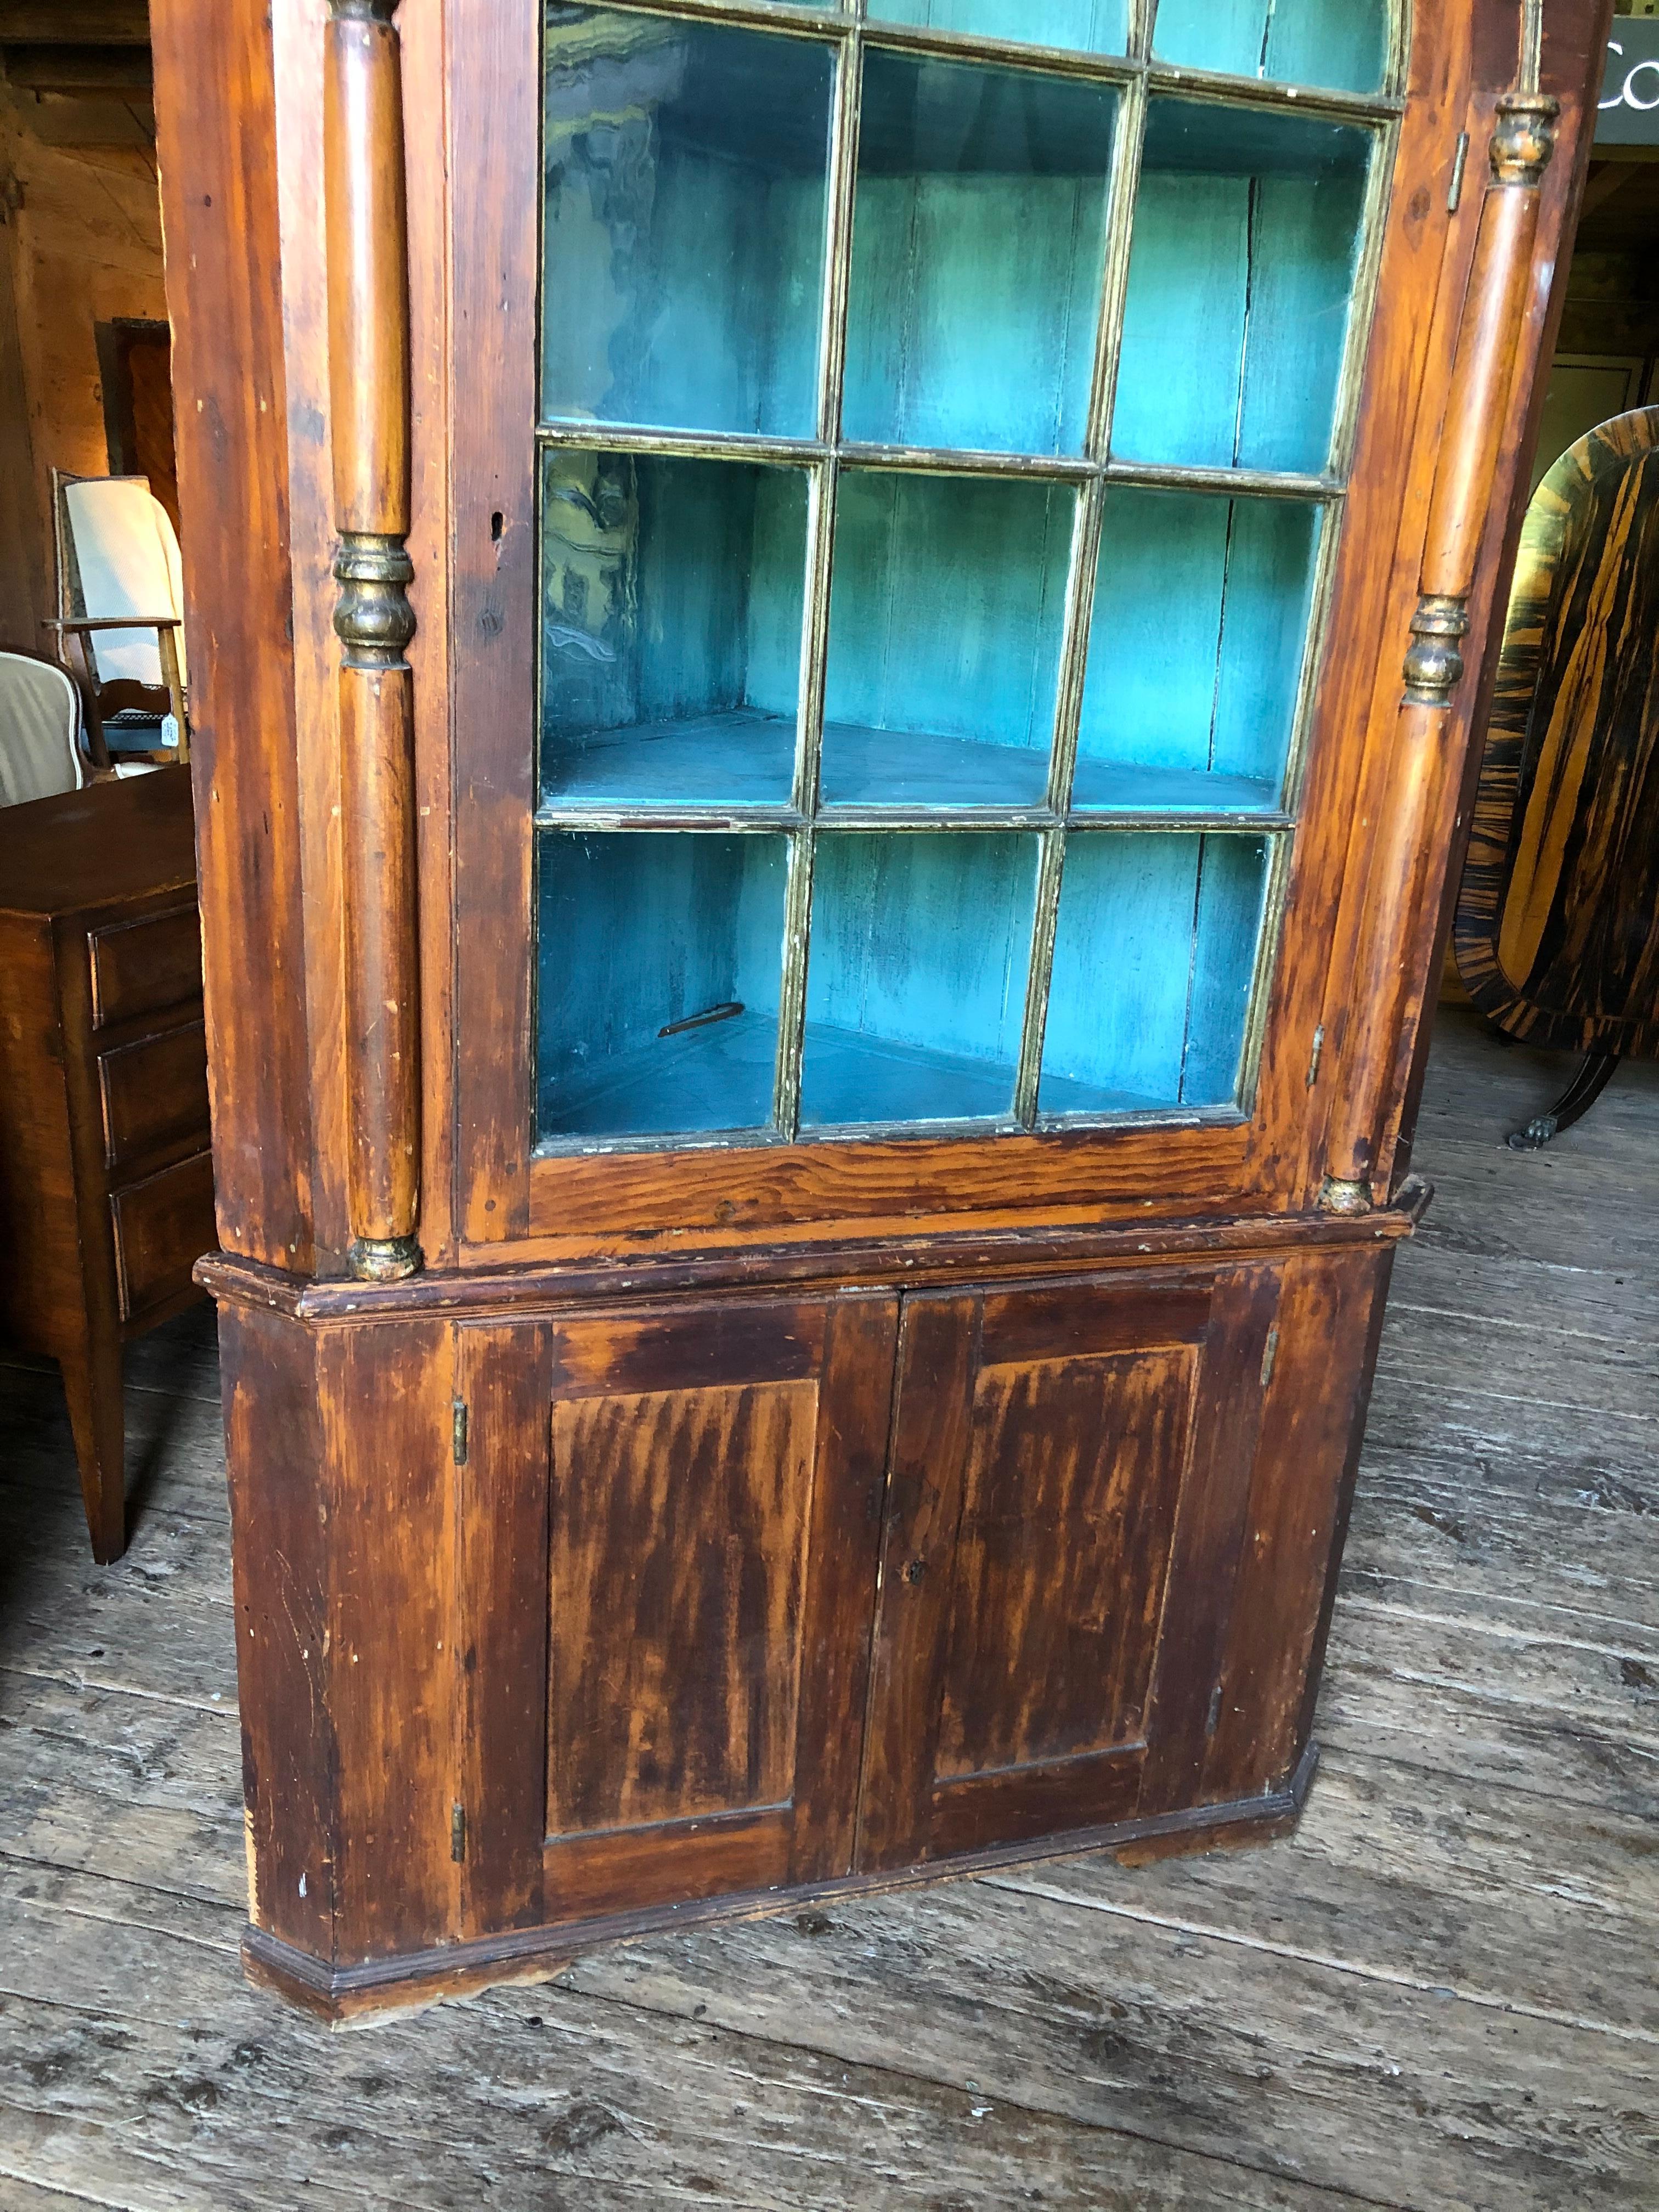 A mid to late 18th century American corner cabinet, the case in faux-painted pine simulating mahogany, probably Pennsylvanian, in 2 parts with upper cabinet having a broken-arch pediment, above a glazed arched door, flanked by applied decorative